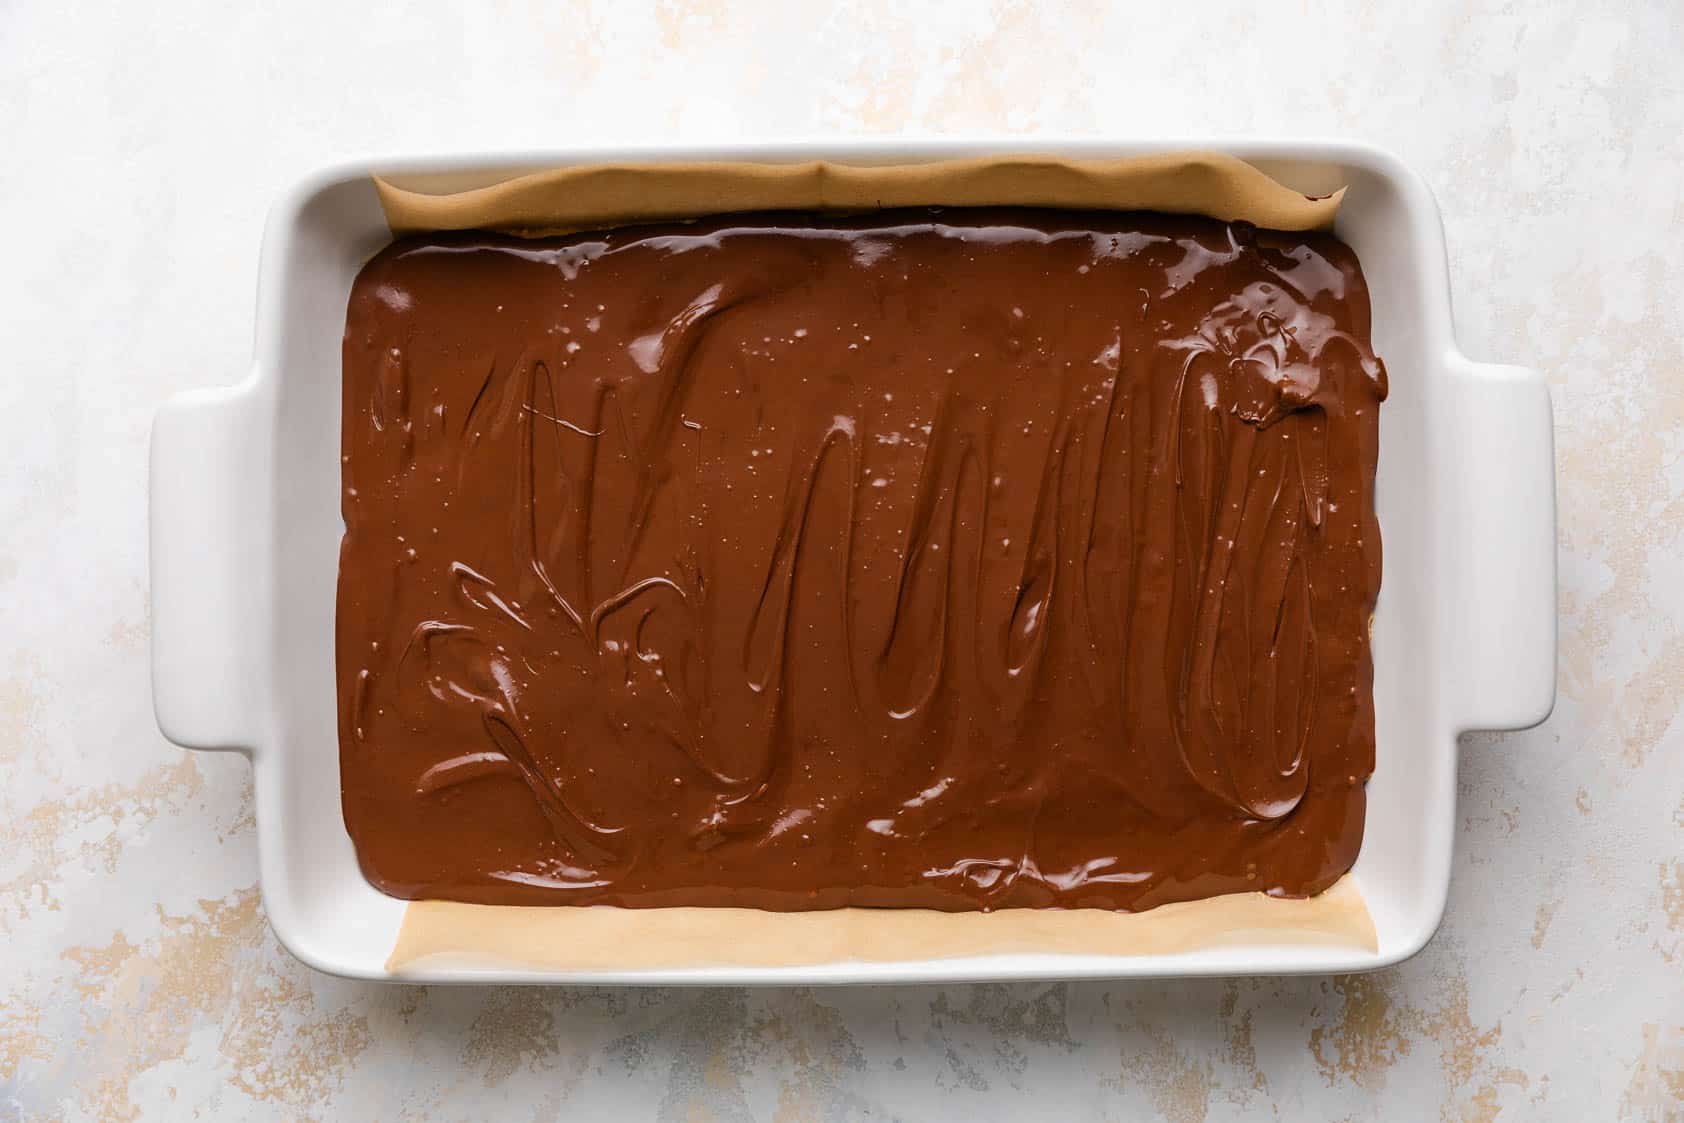 Melted chocolate topping spread over peanut butter.